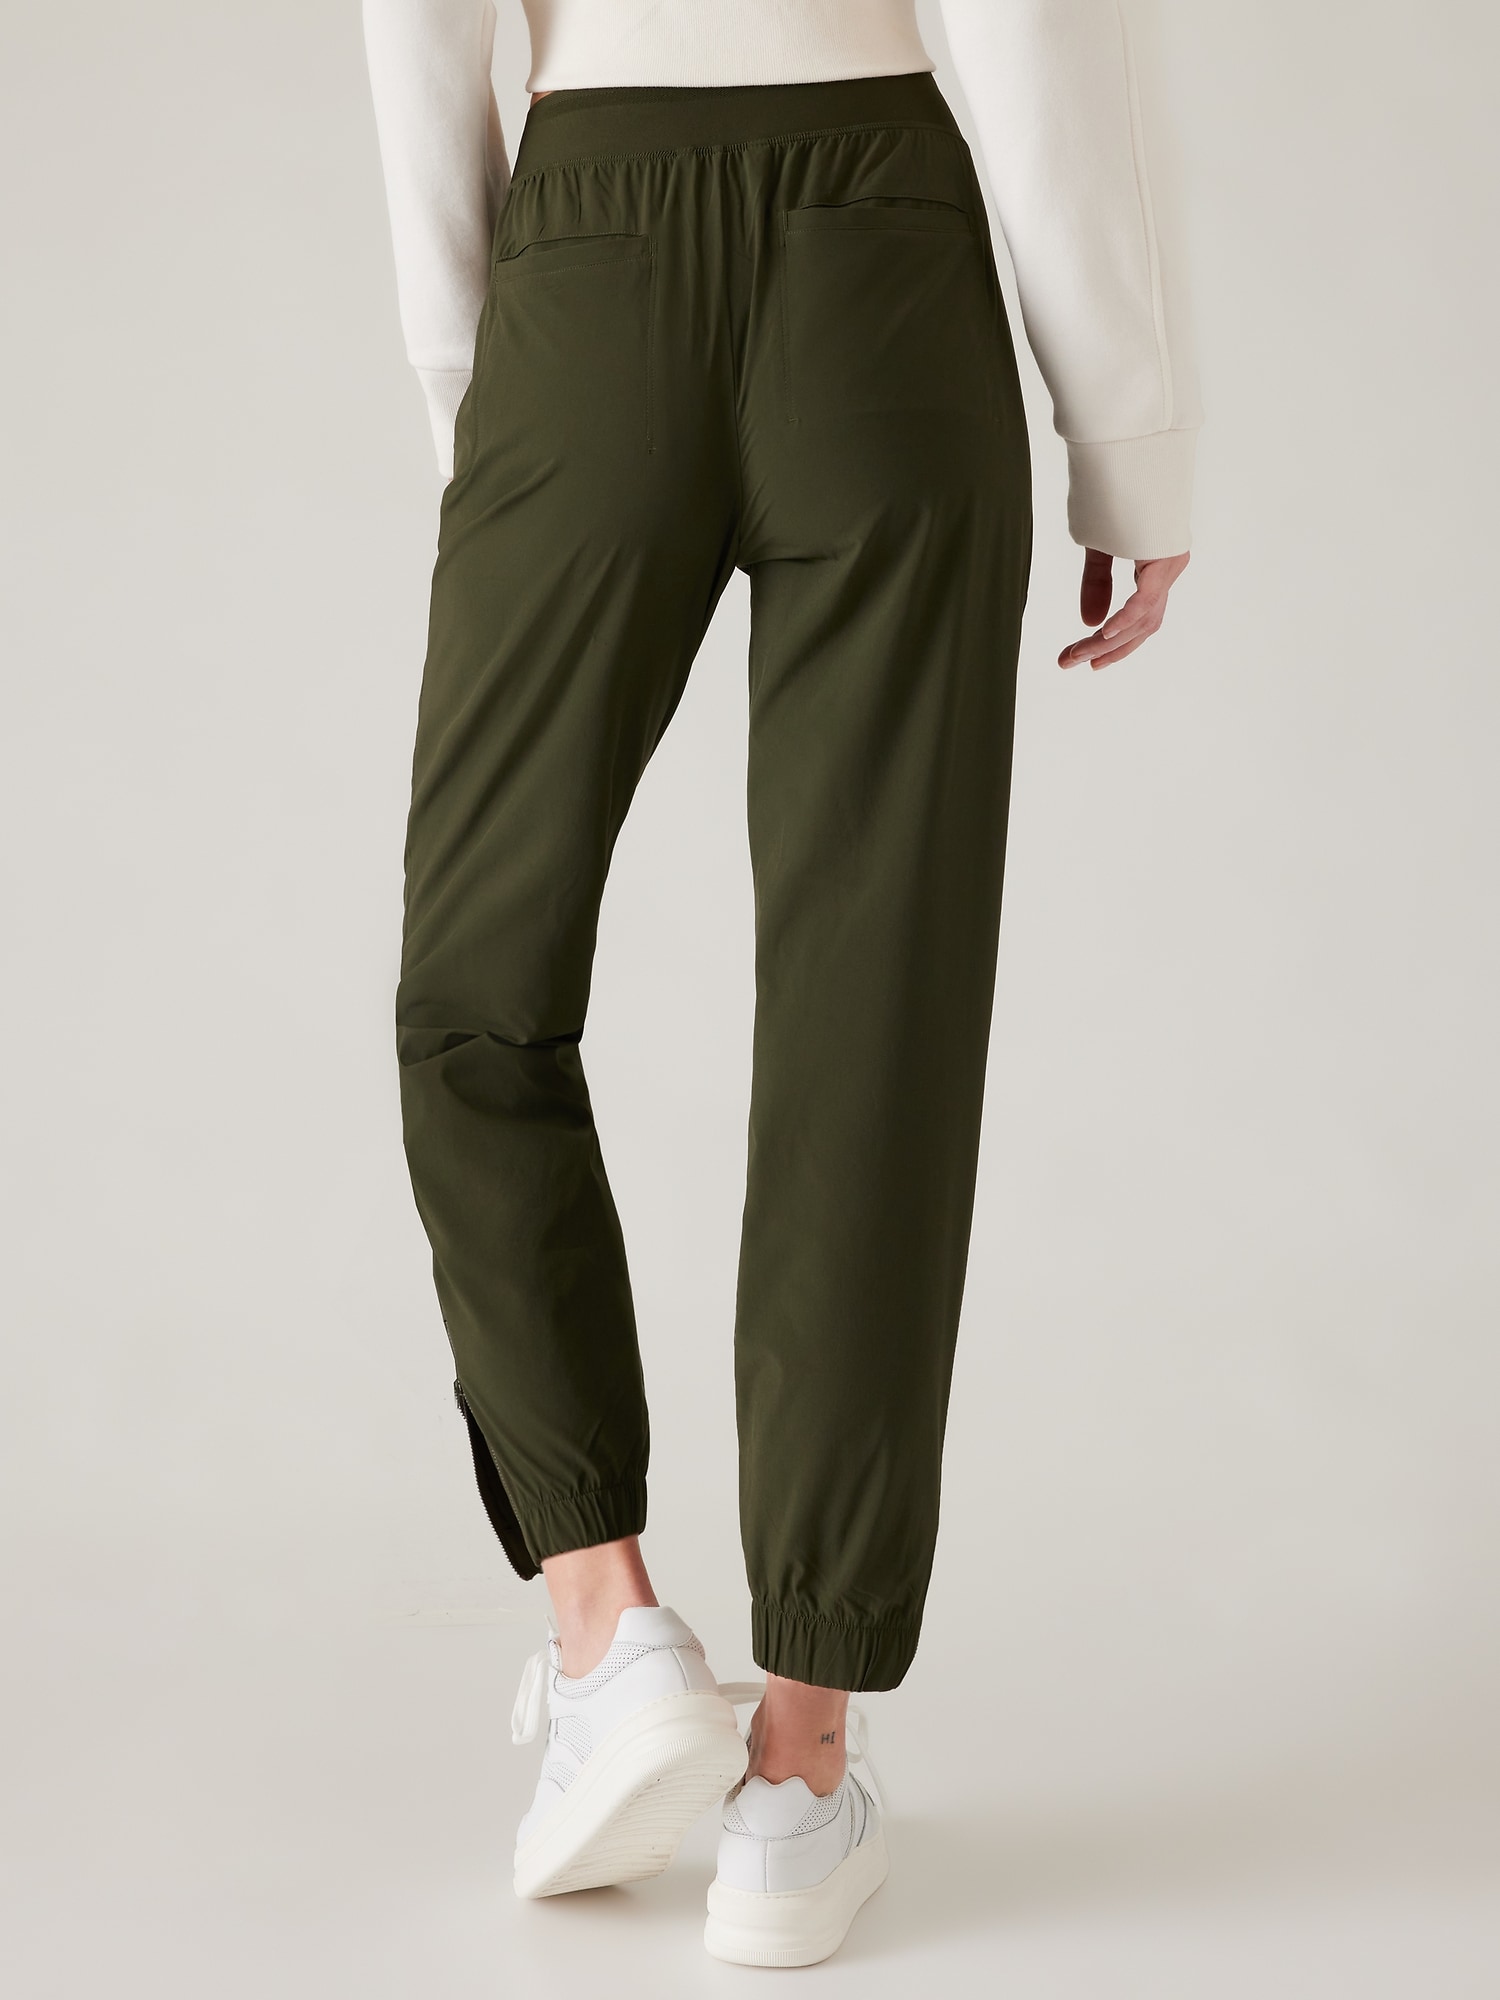 Buy Athleta Brooklyn Heights High Rise Pant - Coffeeberry At 18